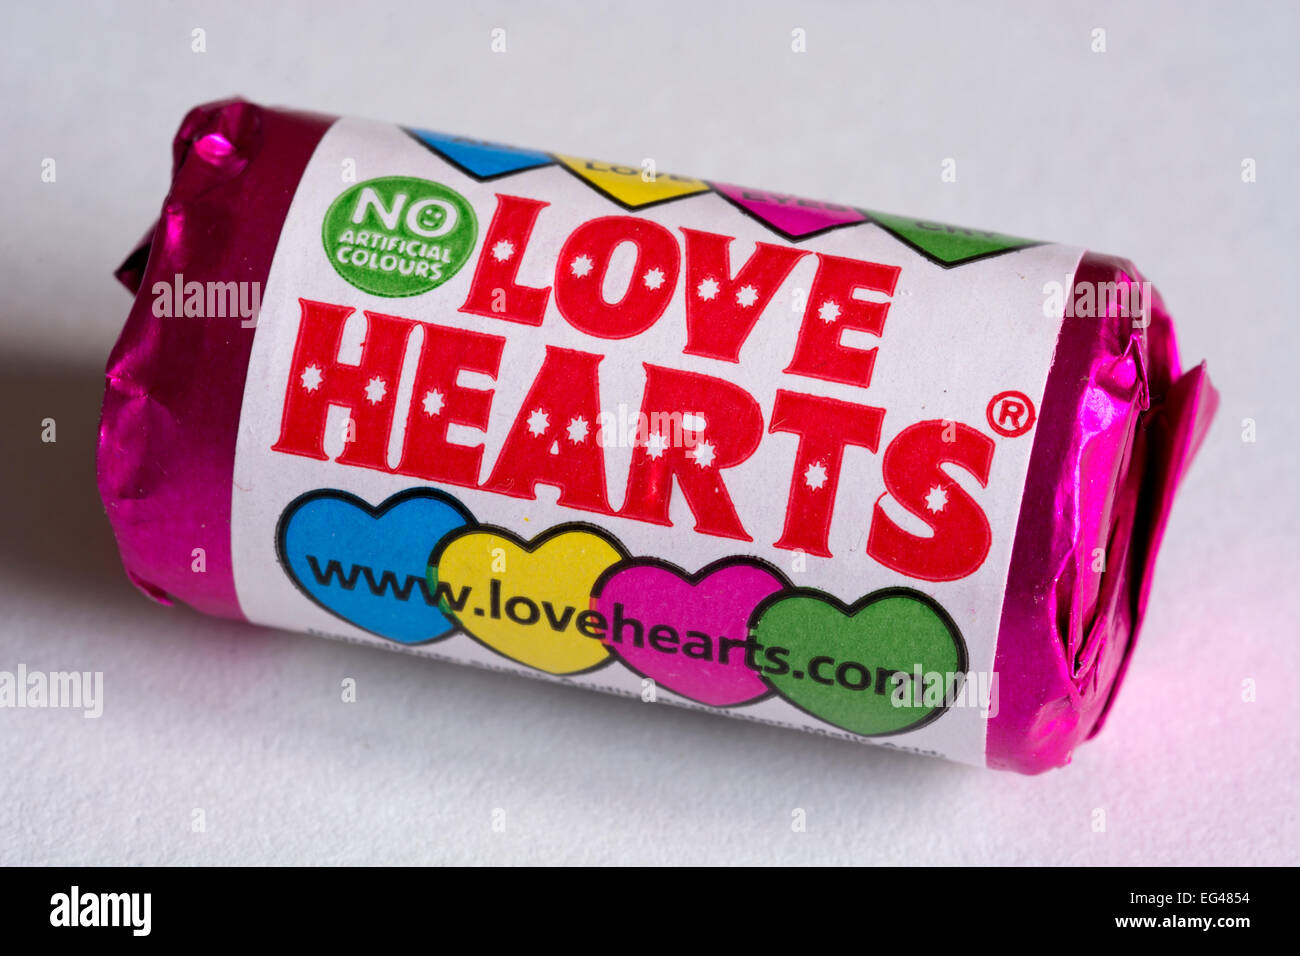 Small packet of Love Hearts sweets. Stock Photo